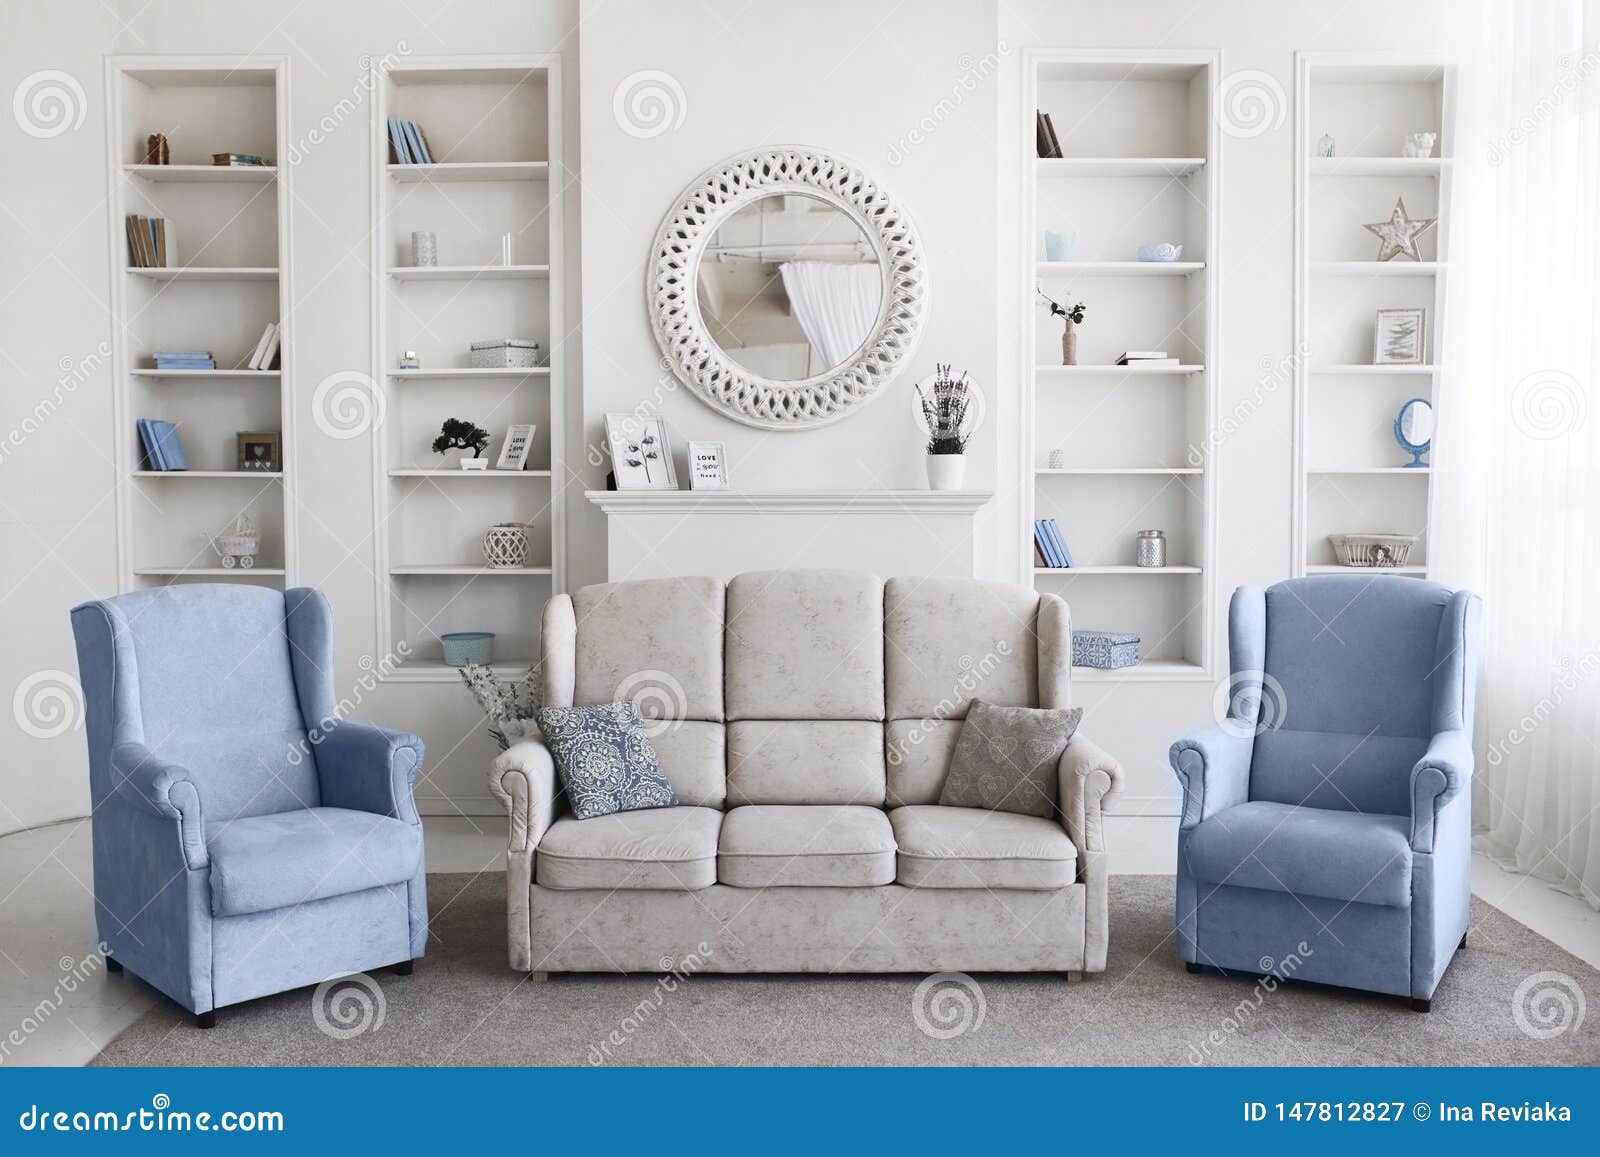 Scandinavian Style Living Room With The Beige Couch With Pillows And Two Blue Armchairs In The Morning Light Stock Image Image Of Armchair Modern 147812827